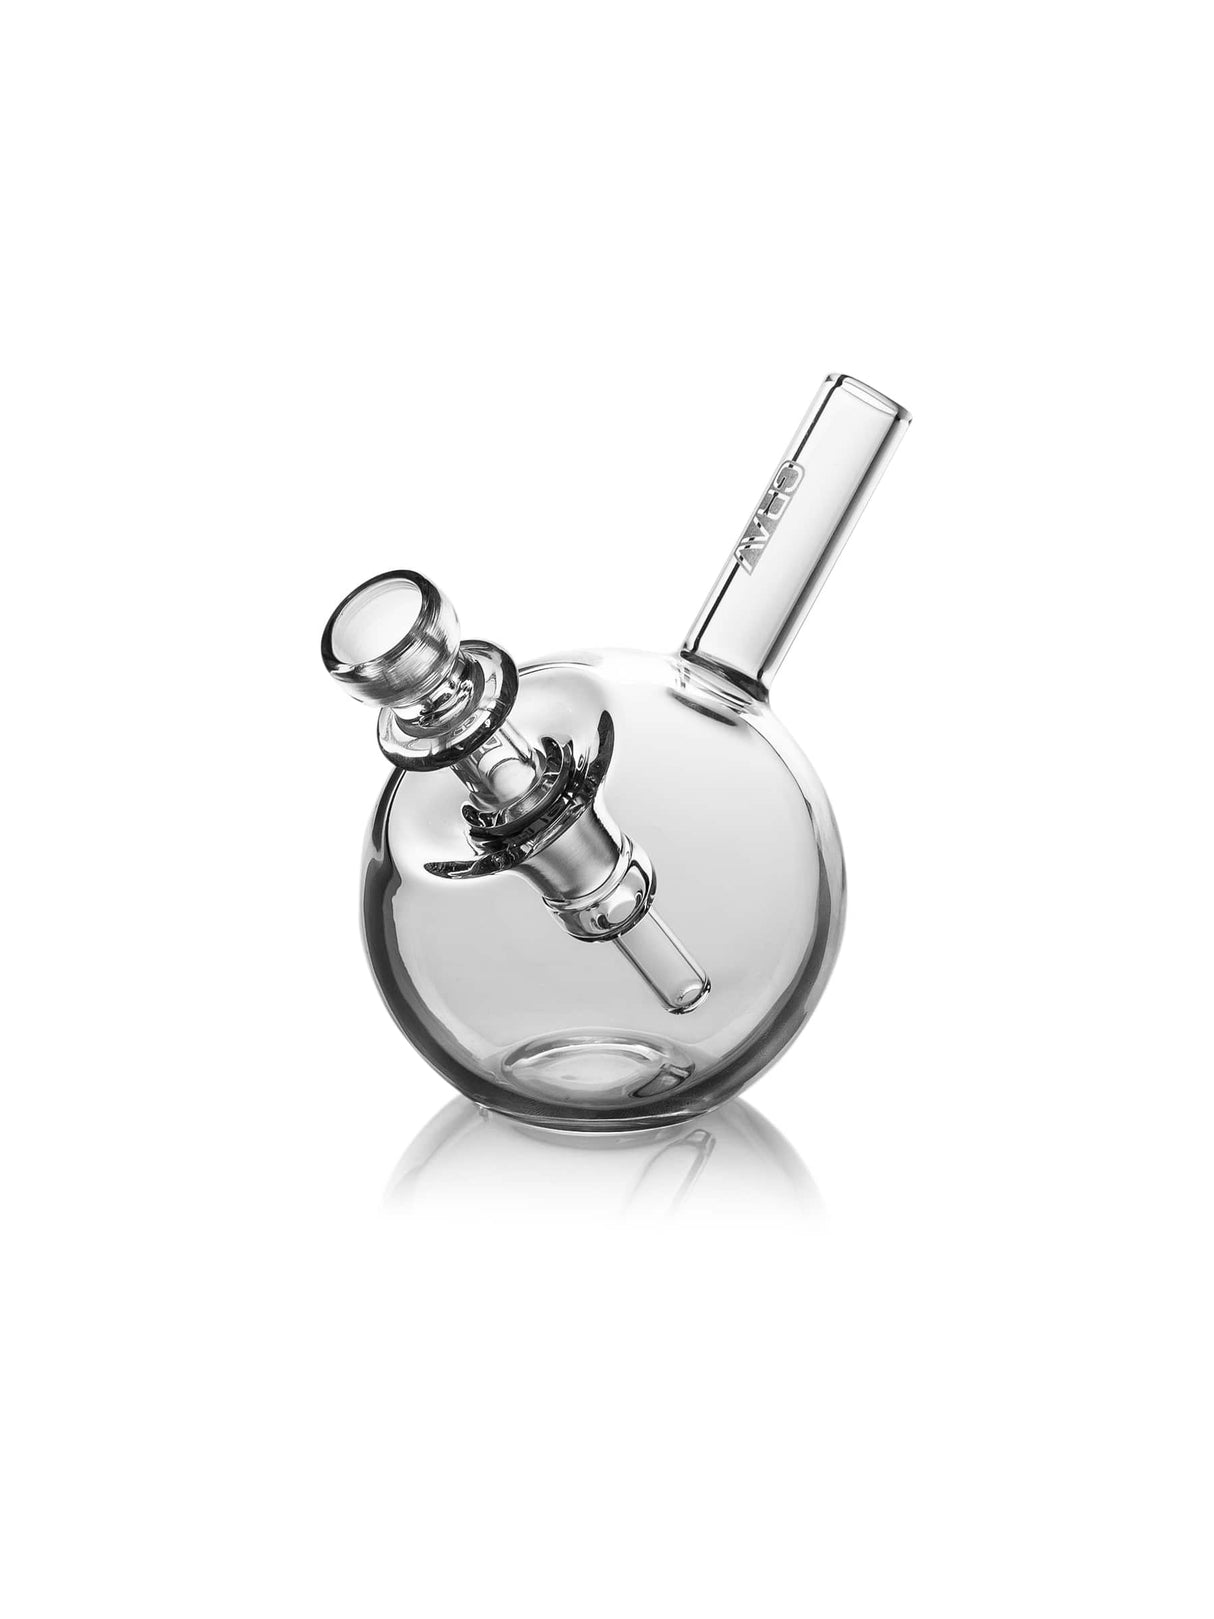 GRAV Spherical Pocket Bubbler in Clear - Compact and Portable Design with 45 Degree Joint